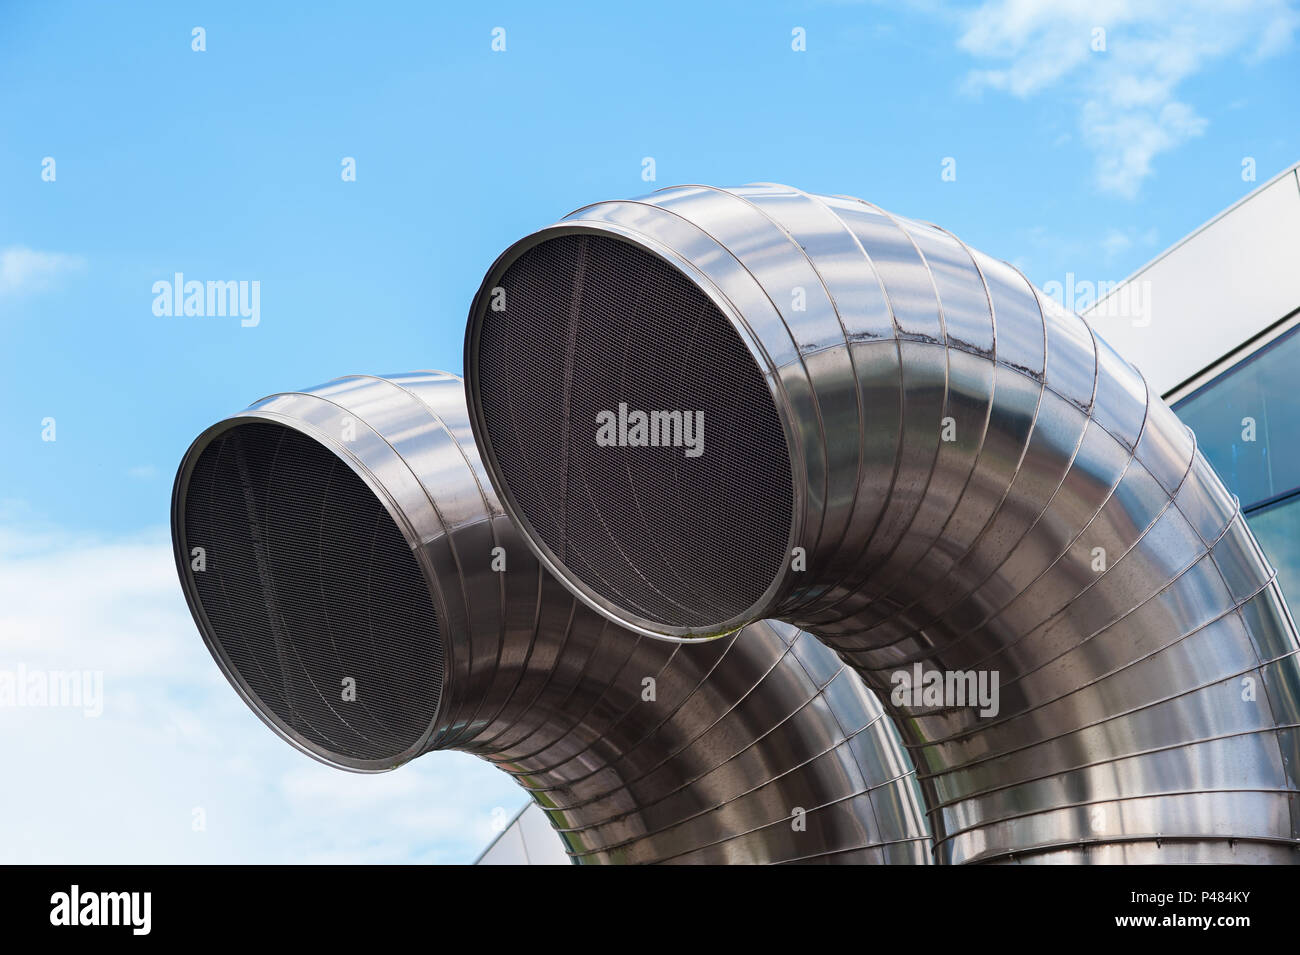 Stainless steel pipes. Air exchange ducts, underground constructions. Parking lots, underground warehouses. Stock Photo